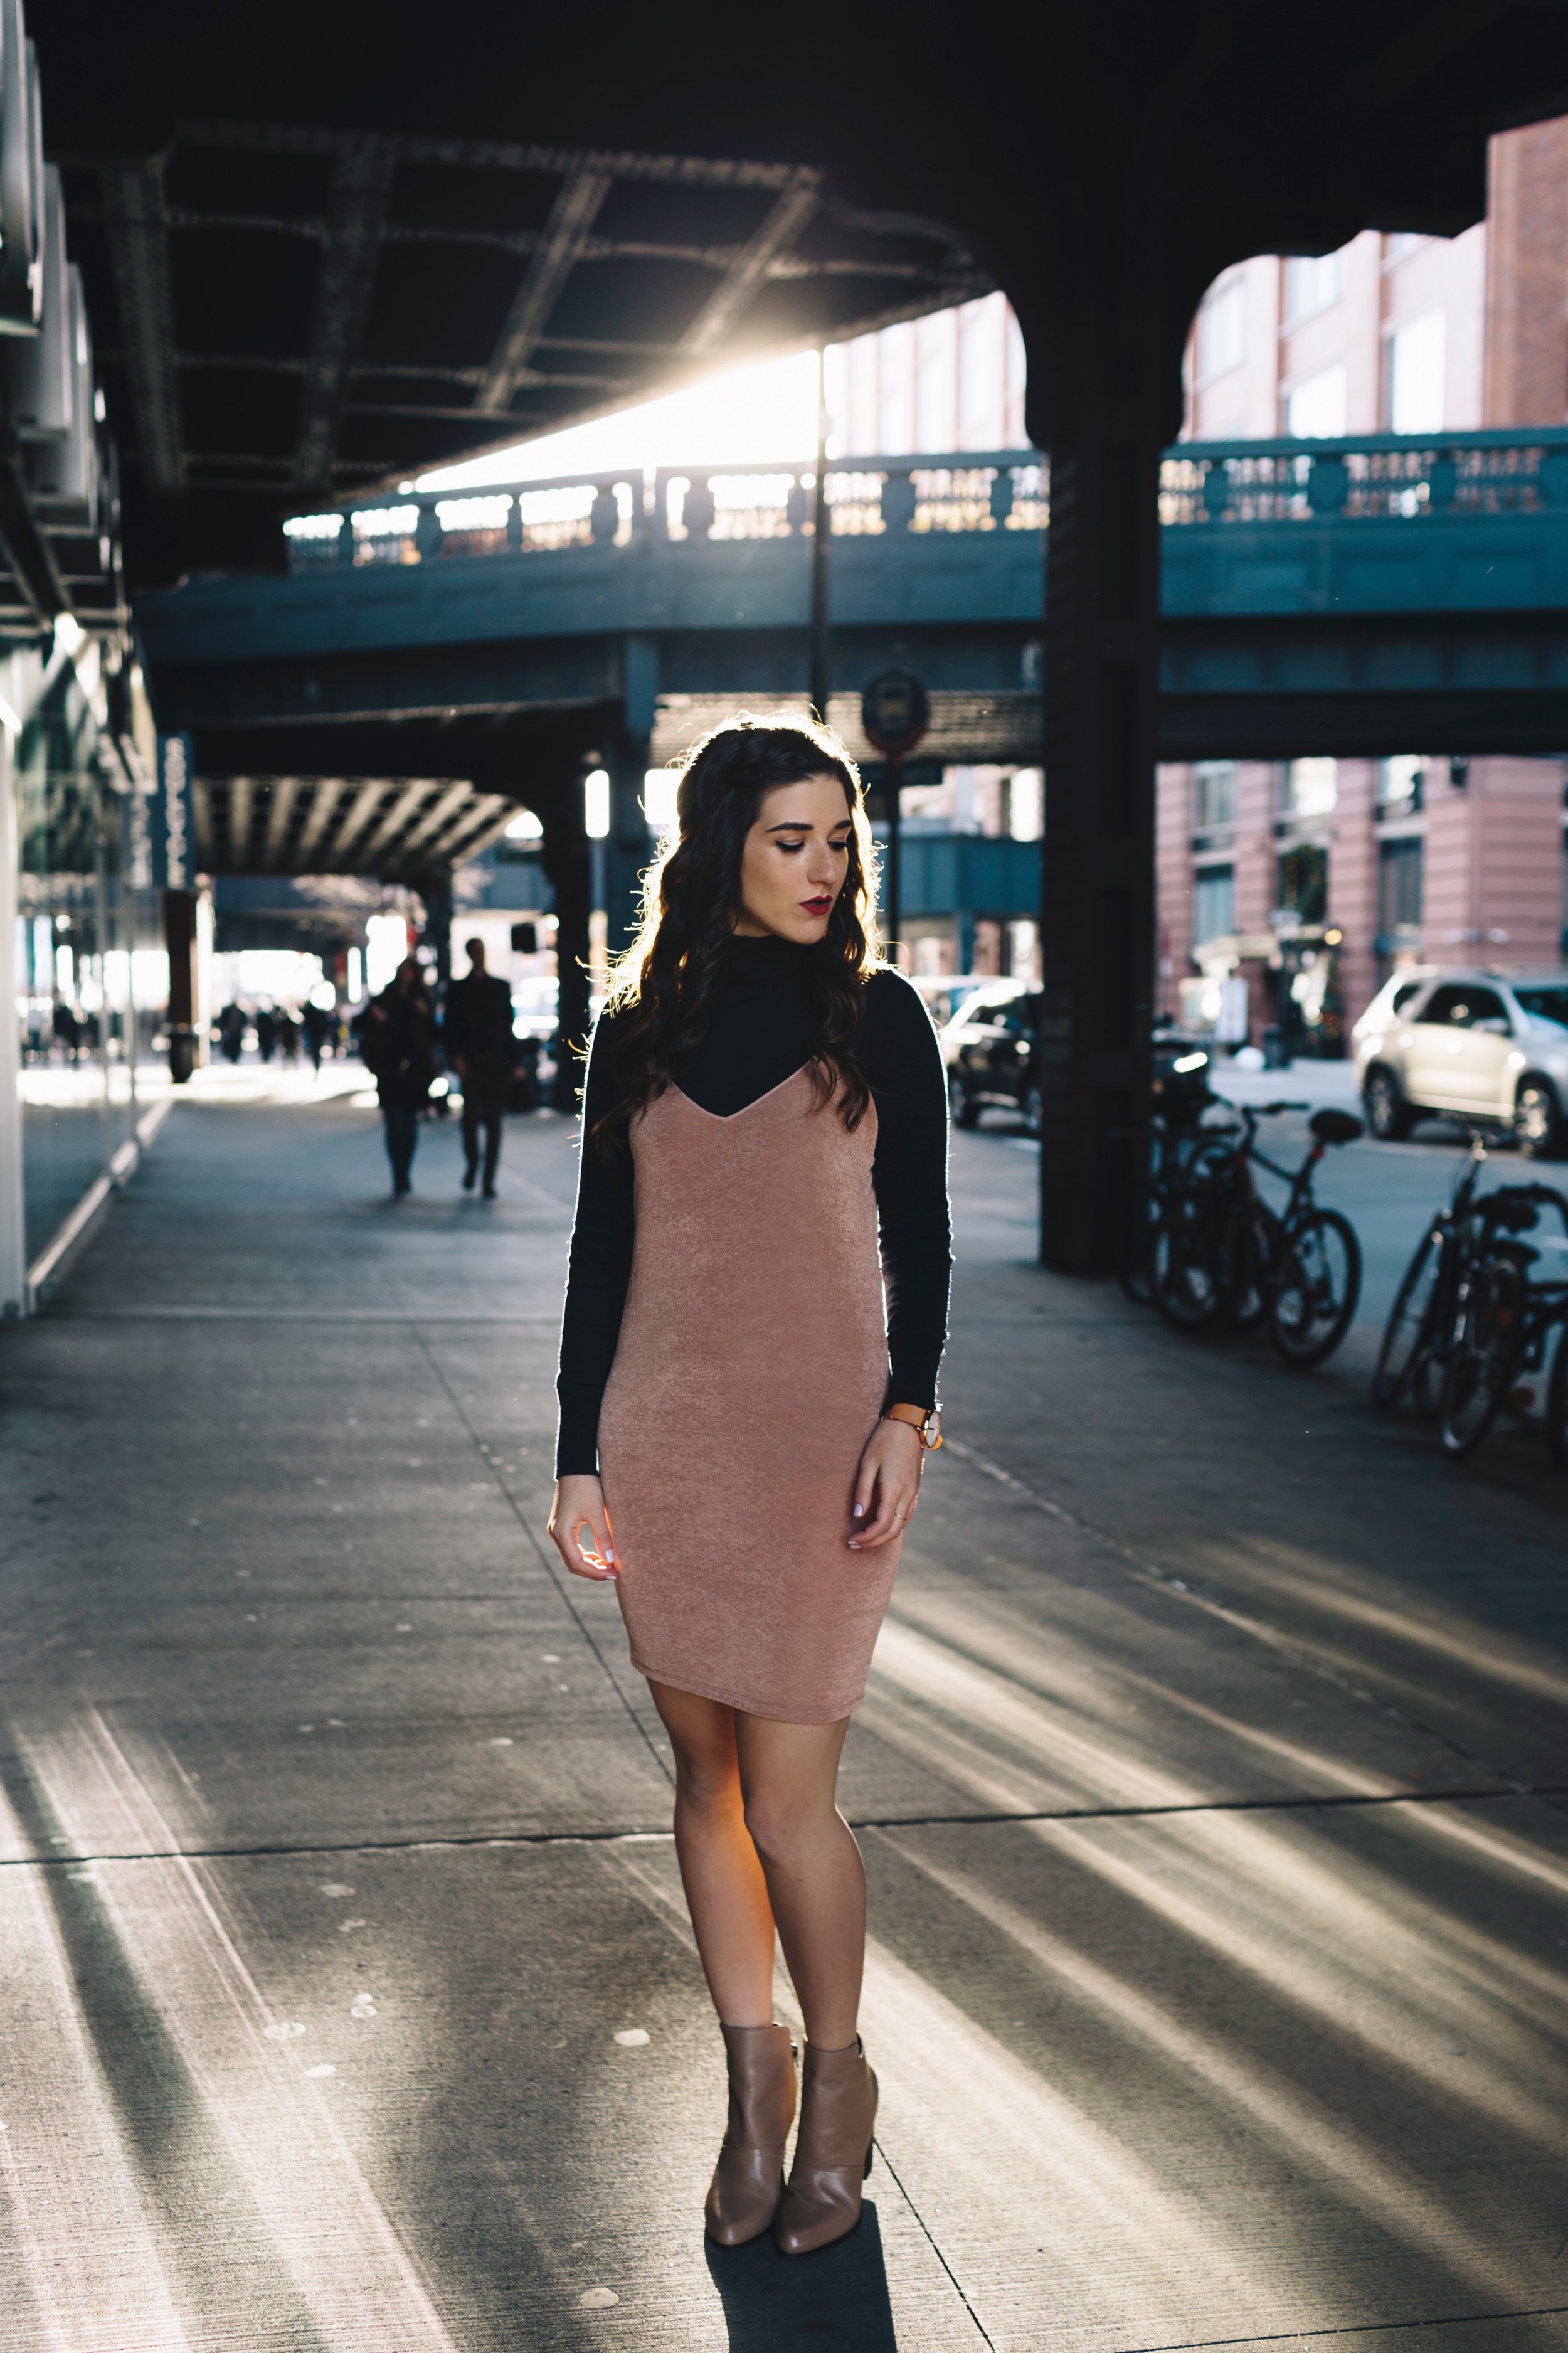 Navy Turtleneck + Pink Slip Dress Finding Your Niche Esther Santer Fashion Blog Louboutins & Love NYC Street Style Blogger Outfit OOTD Trendy Booties Shoes Hair Girl Women Winter Look Shopping Zara  Shirt M4D3 Banana Republic Photoshoot  New York City.JPG